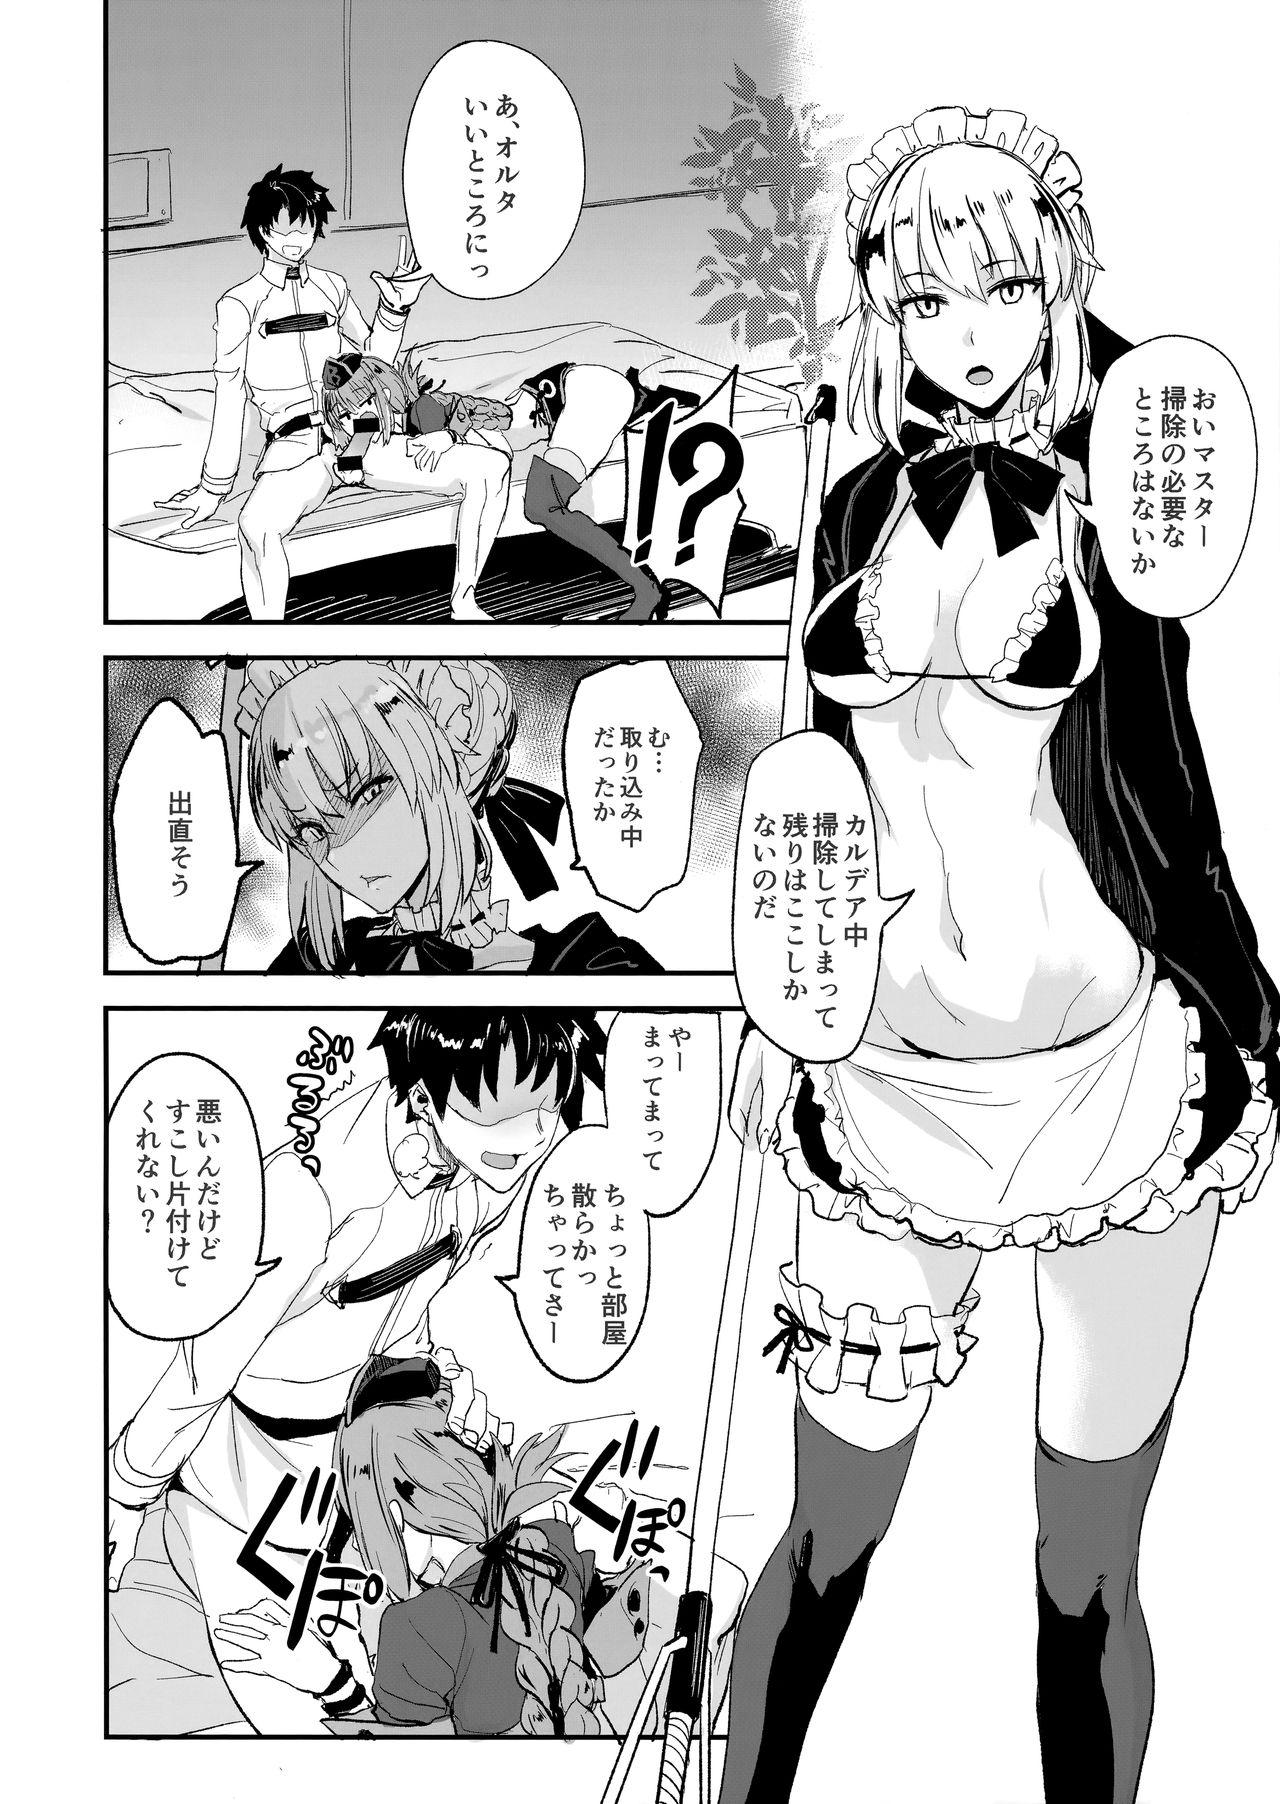 Stepsiblings FGO no Erohon 2 - Fate grand order Doggystyle Porn - Page 5